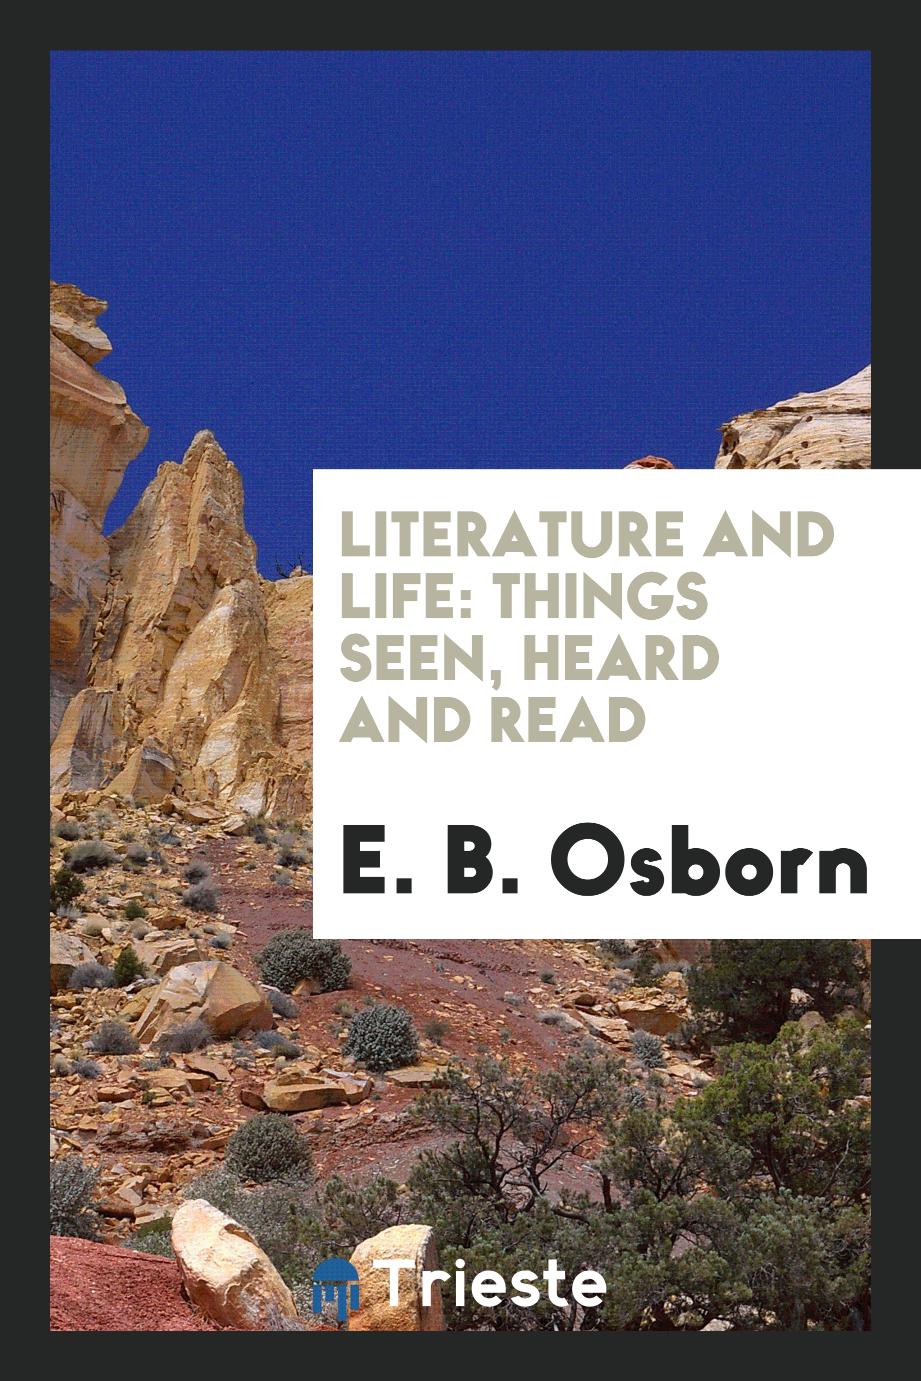 Literature and life: things seen, heard and read